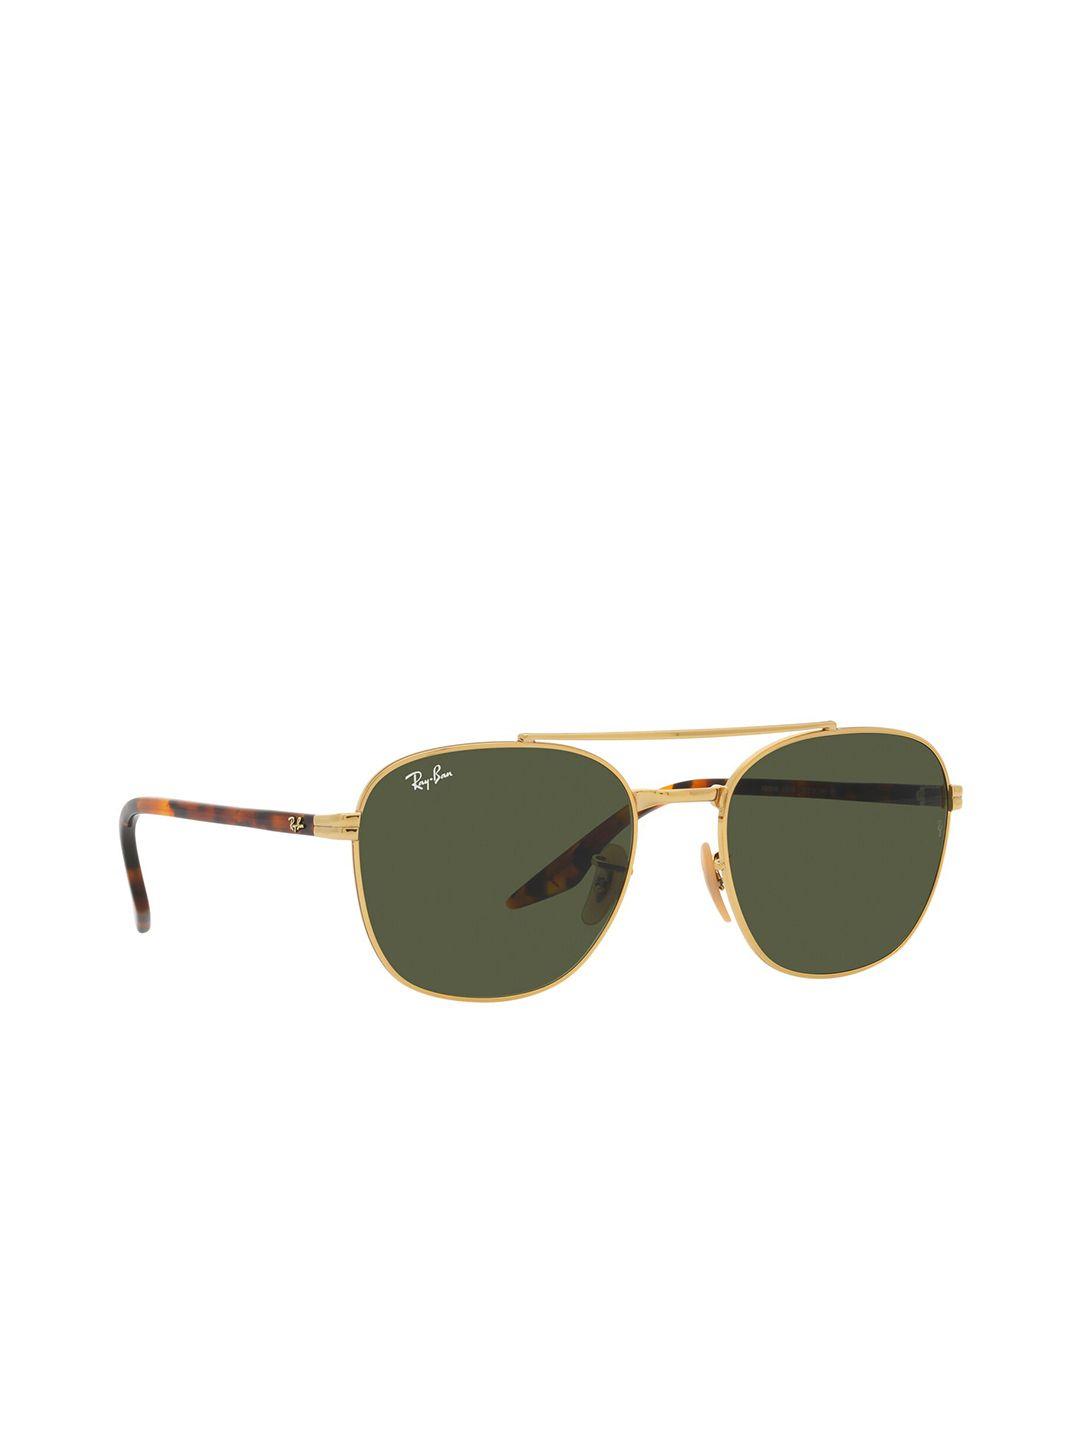 ray-ban square sunglasses with uv protected lens 8056597626019